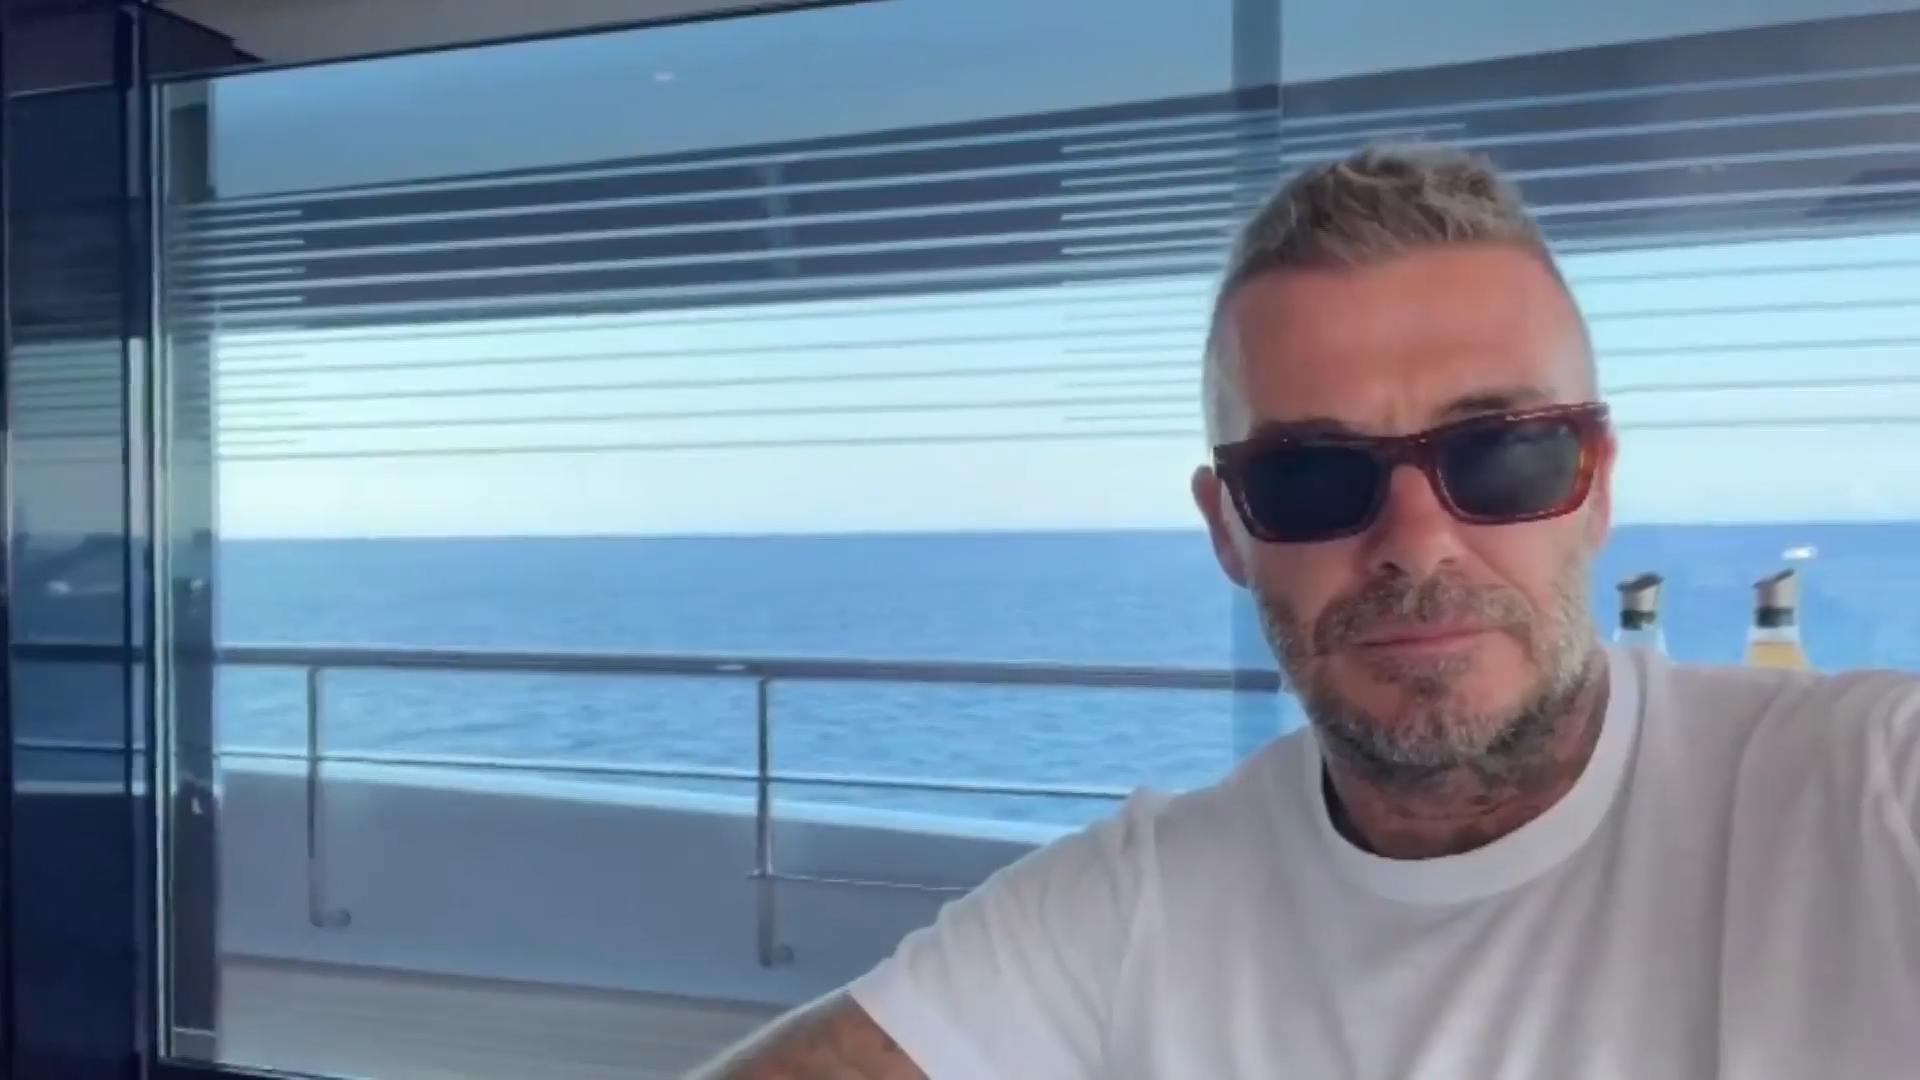 David pokes fun at Victoria Beckham's exercise addiction while on vacation